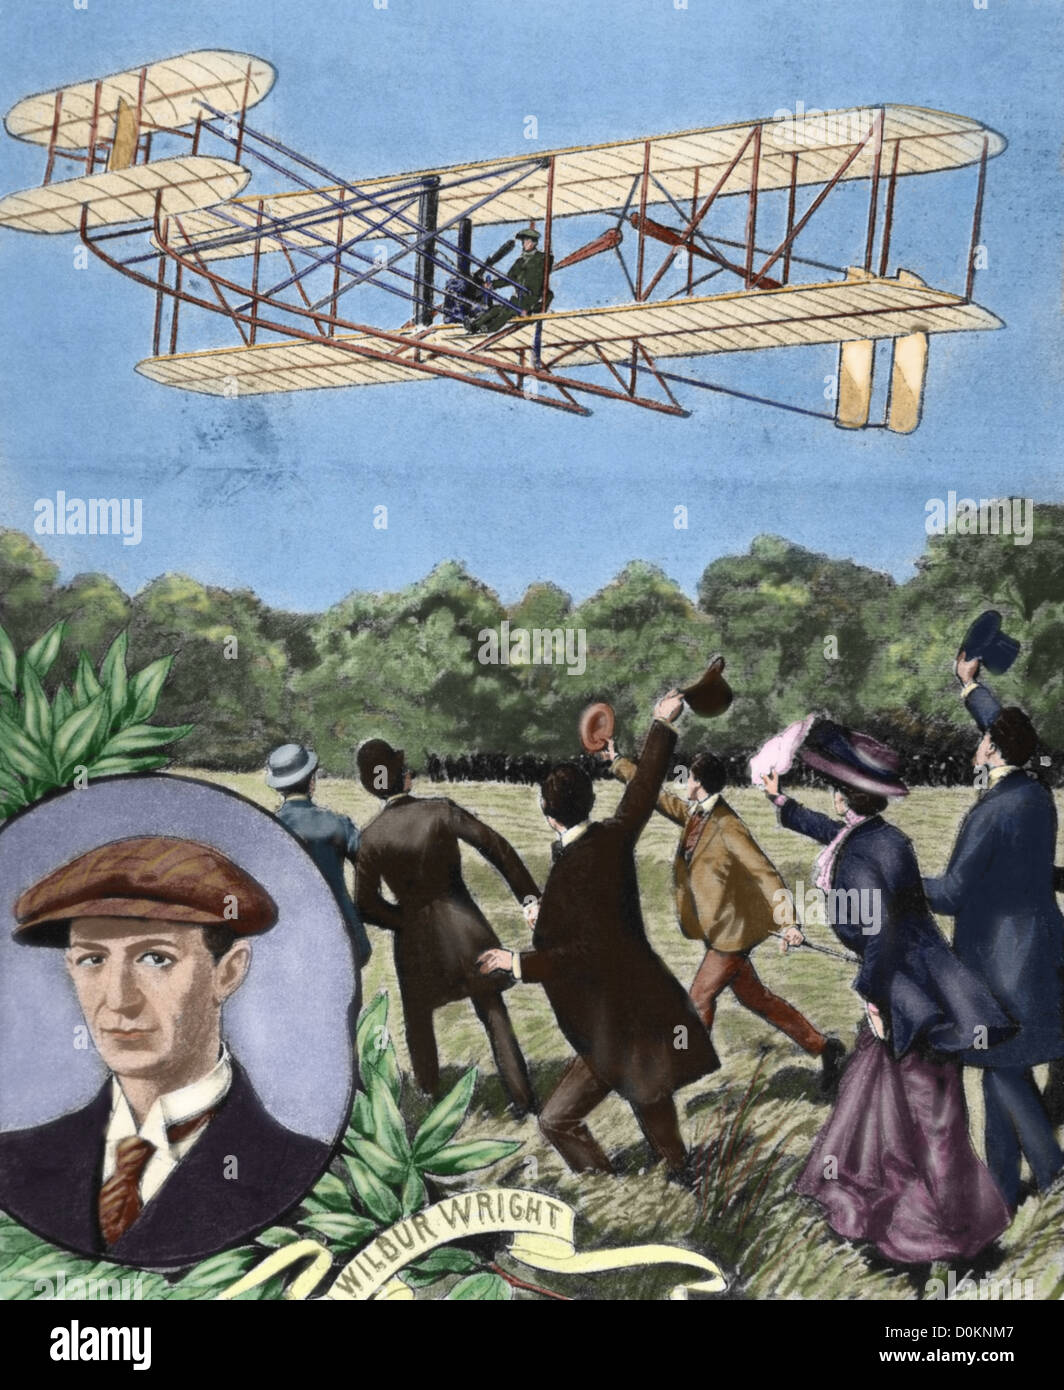 Wilbur Wright (1867-1912). American aviator. Plane flying over the field Anvours (France). Colored engraving. Stock Photo